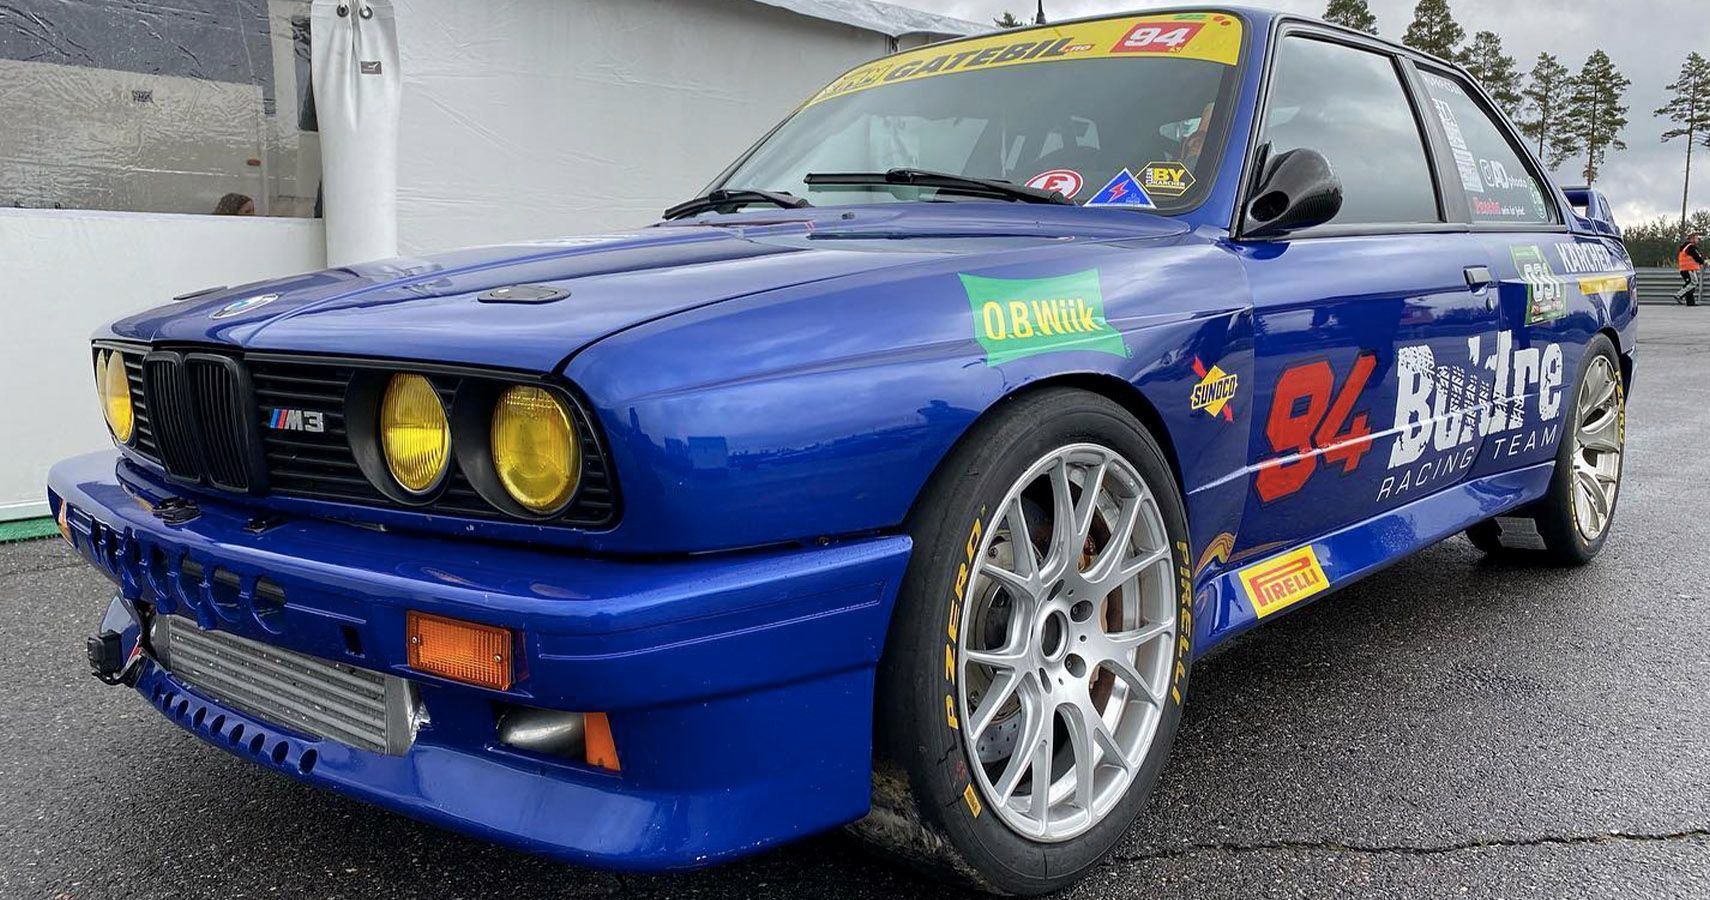 Watch A 2JZ-Swapped BMW E30 Lap The Ring In 7:26 Flipboard.